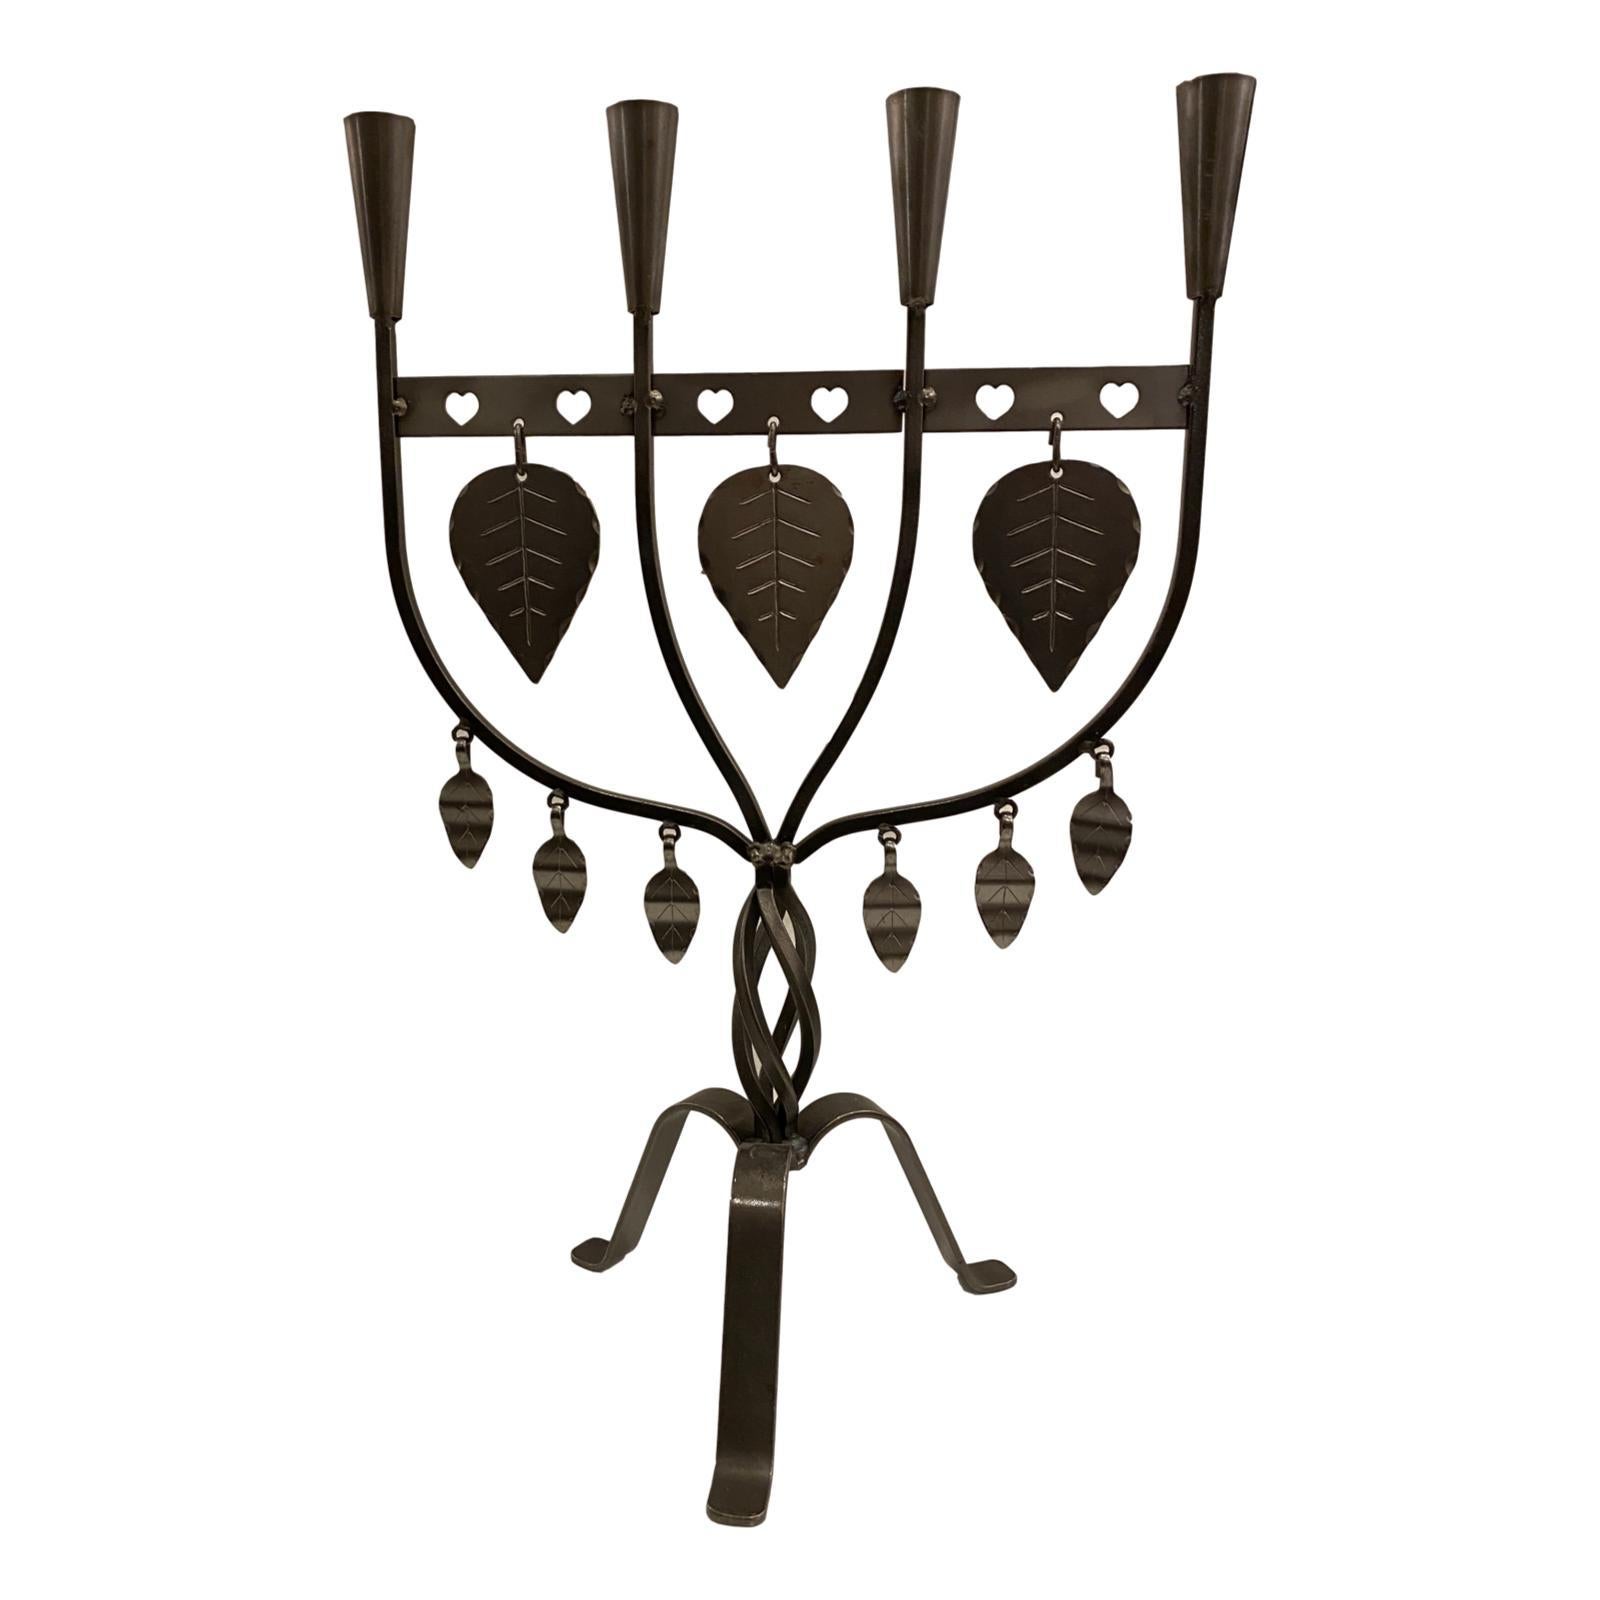 A pair of circa 1960s Swedish wrought iron candelabras.

Measurements:
Height of body 18.75